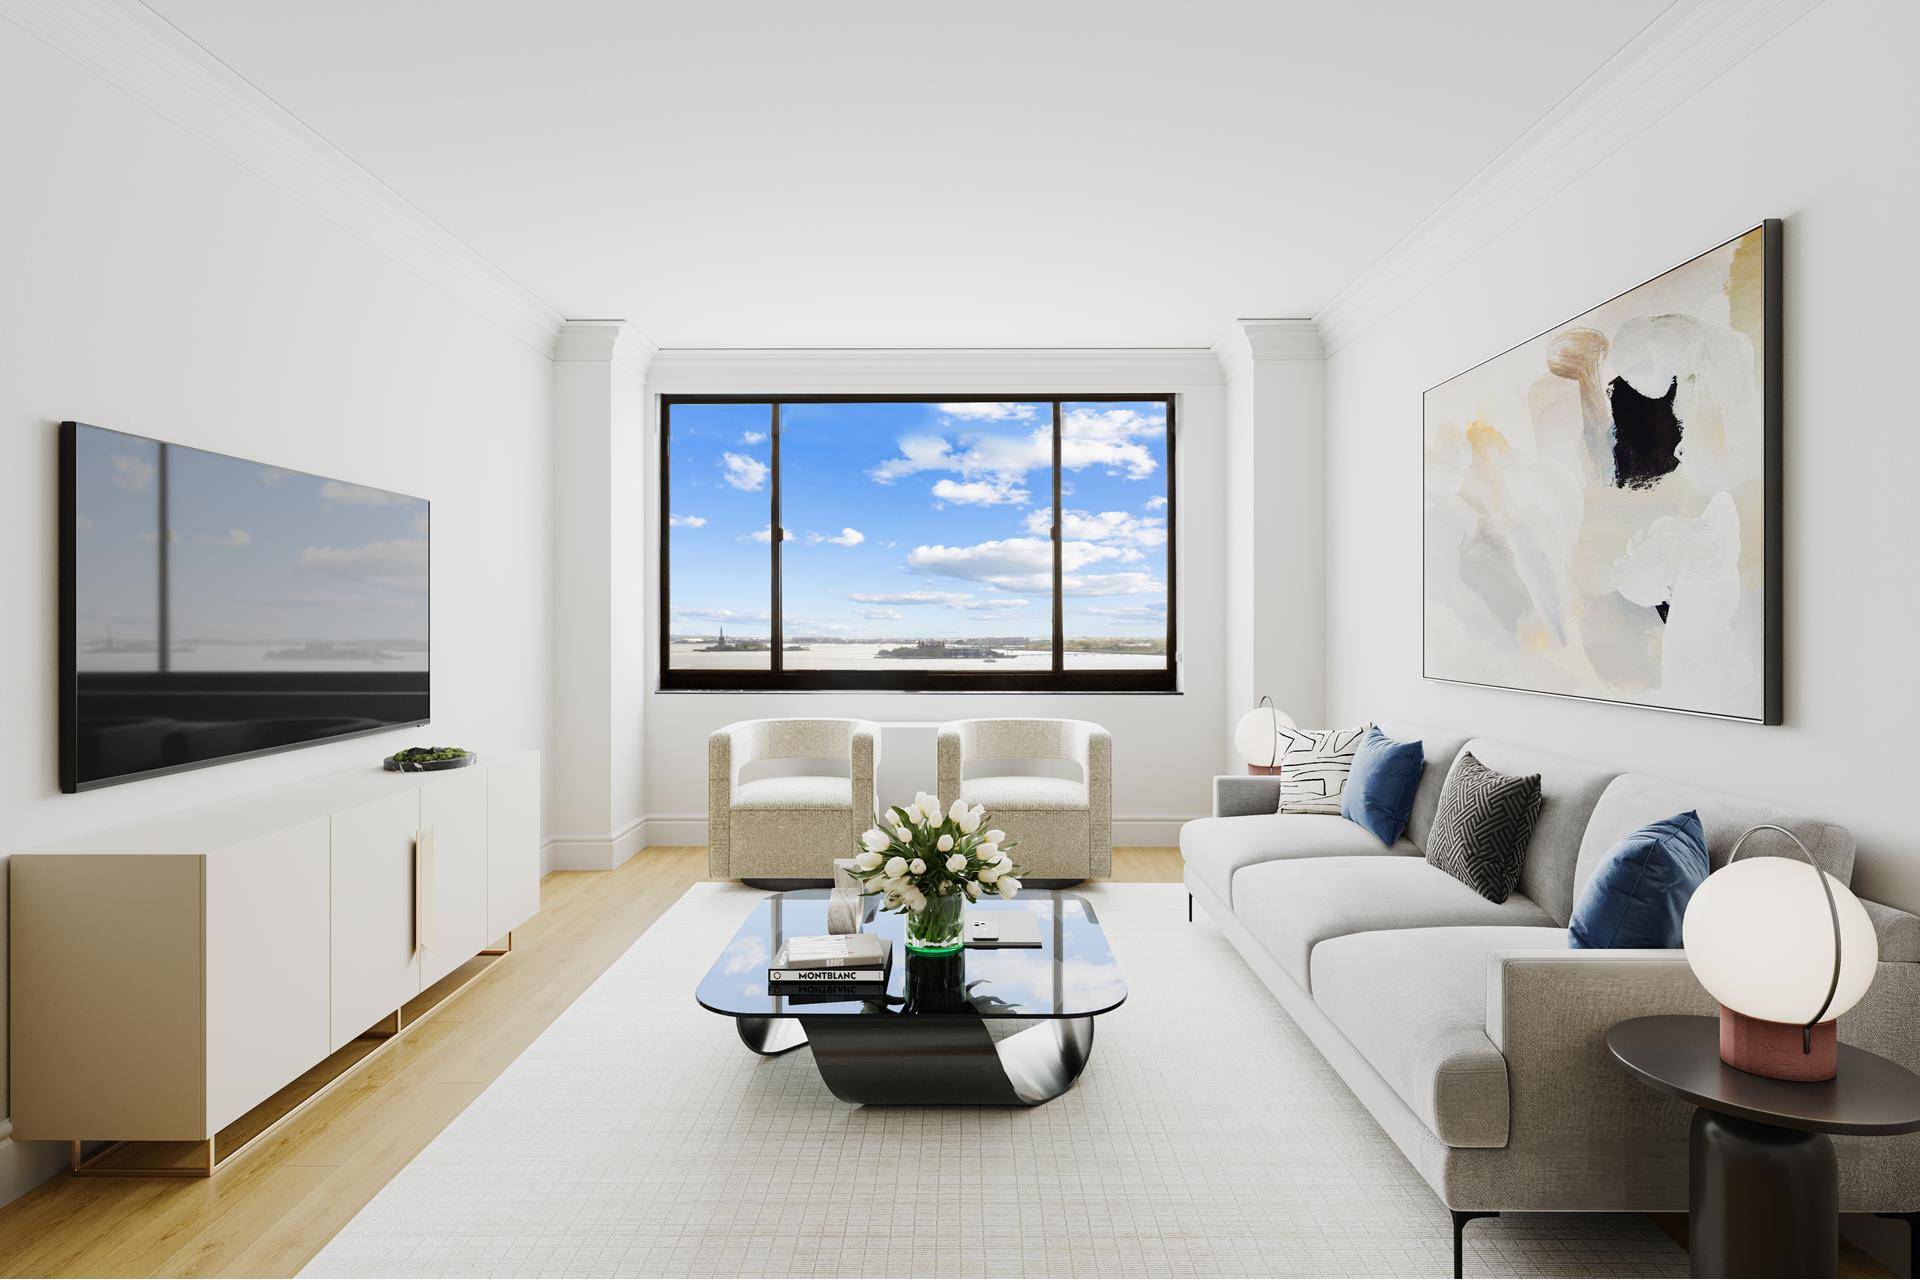 Experience the epitome of urban living in this exquisite 1 bedroom, 1 bathroom apartment in Battery Park City.